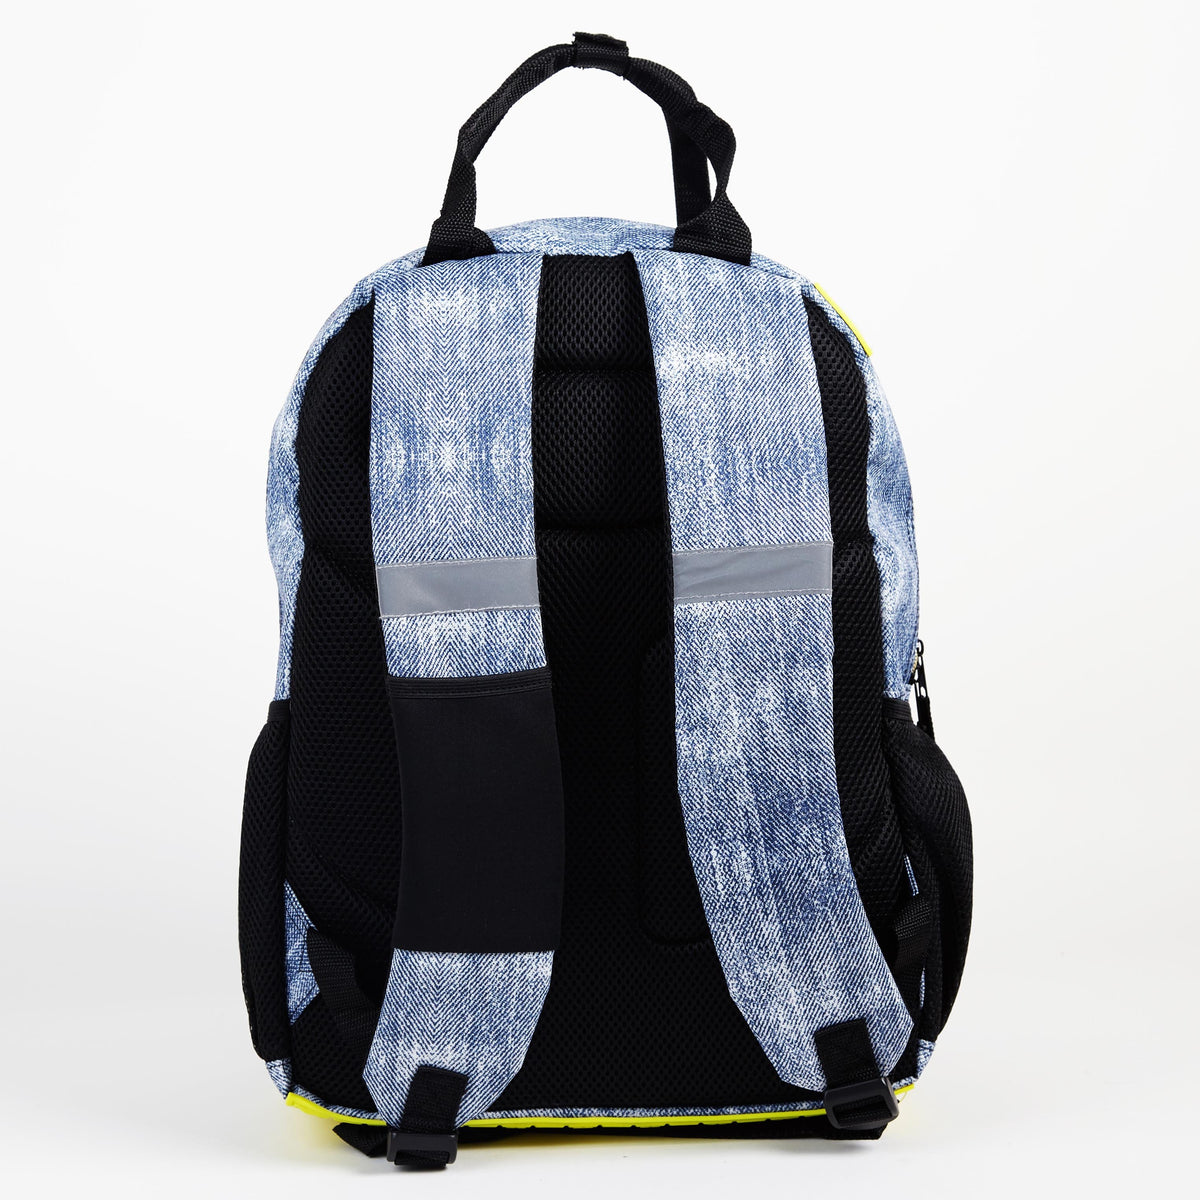 Yak Pak Backpack Denim/Jean Look with Patches, Laptop and Phone Pockets ...